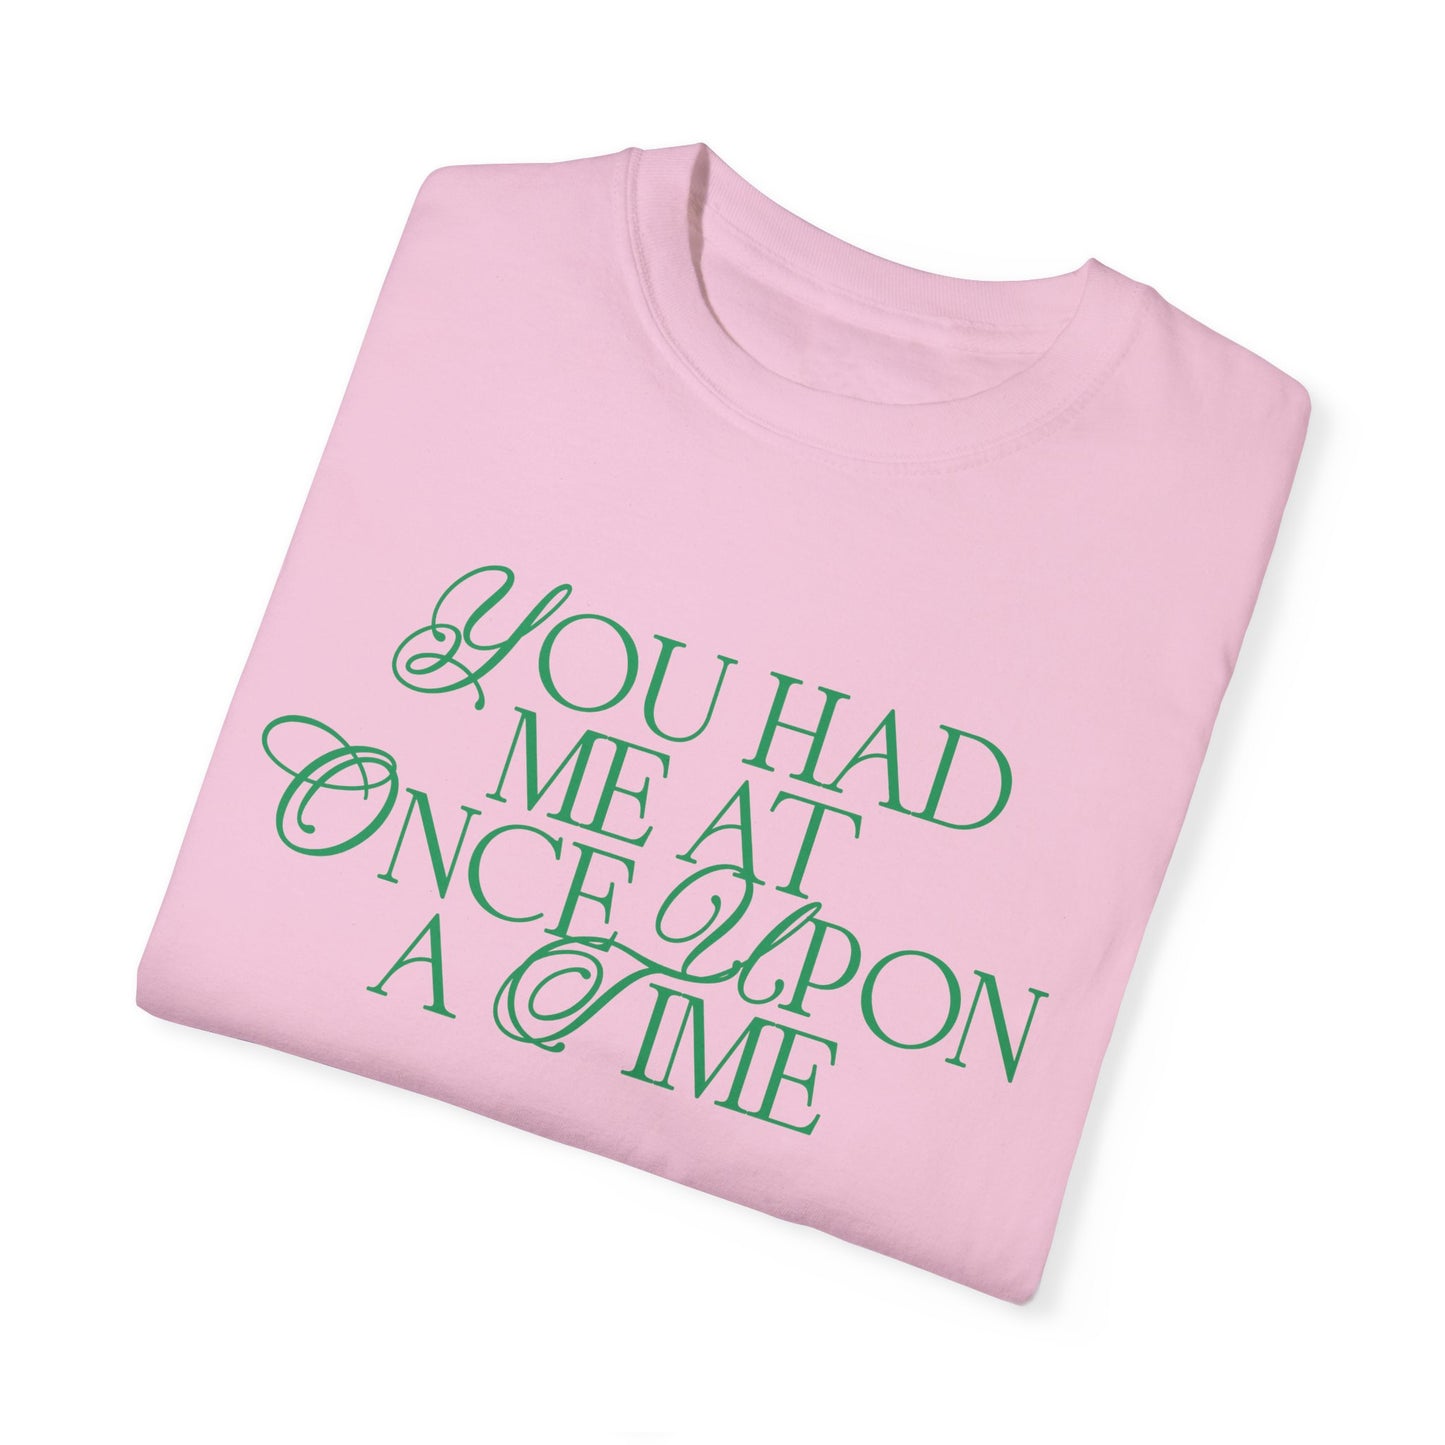 You had me at once upon a time - Tee